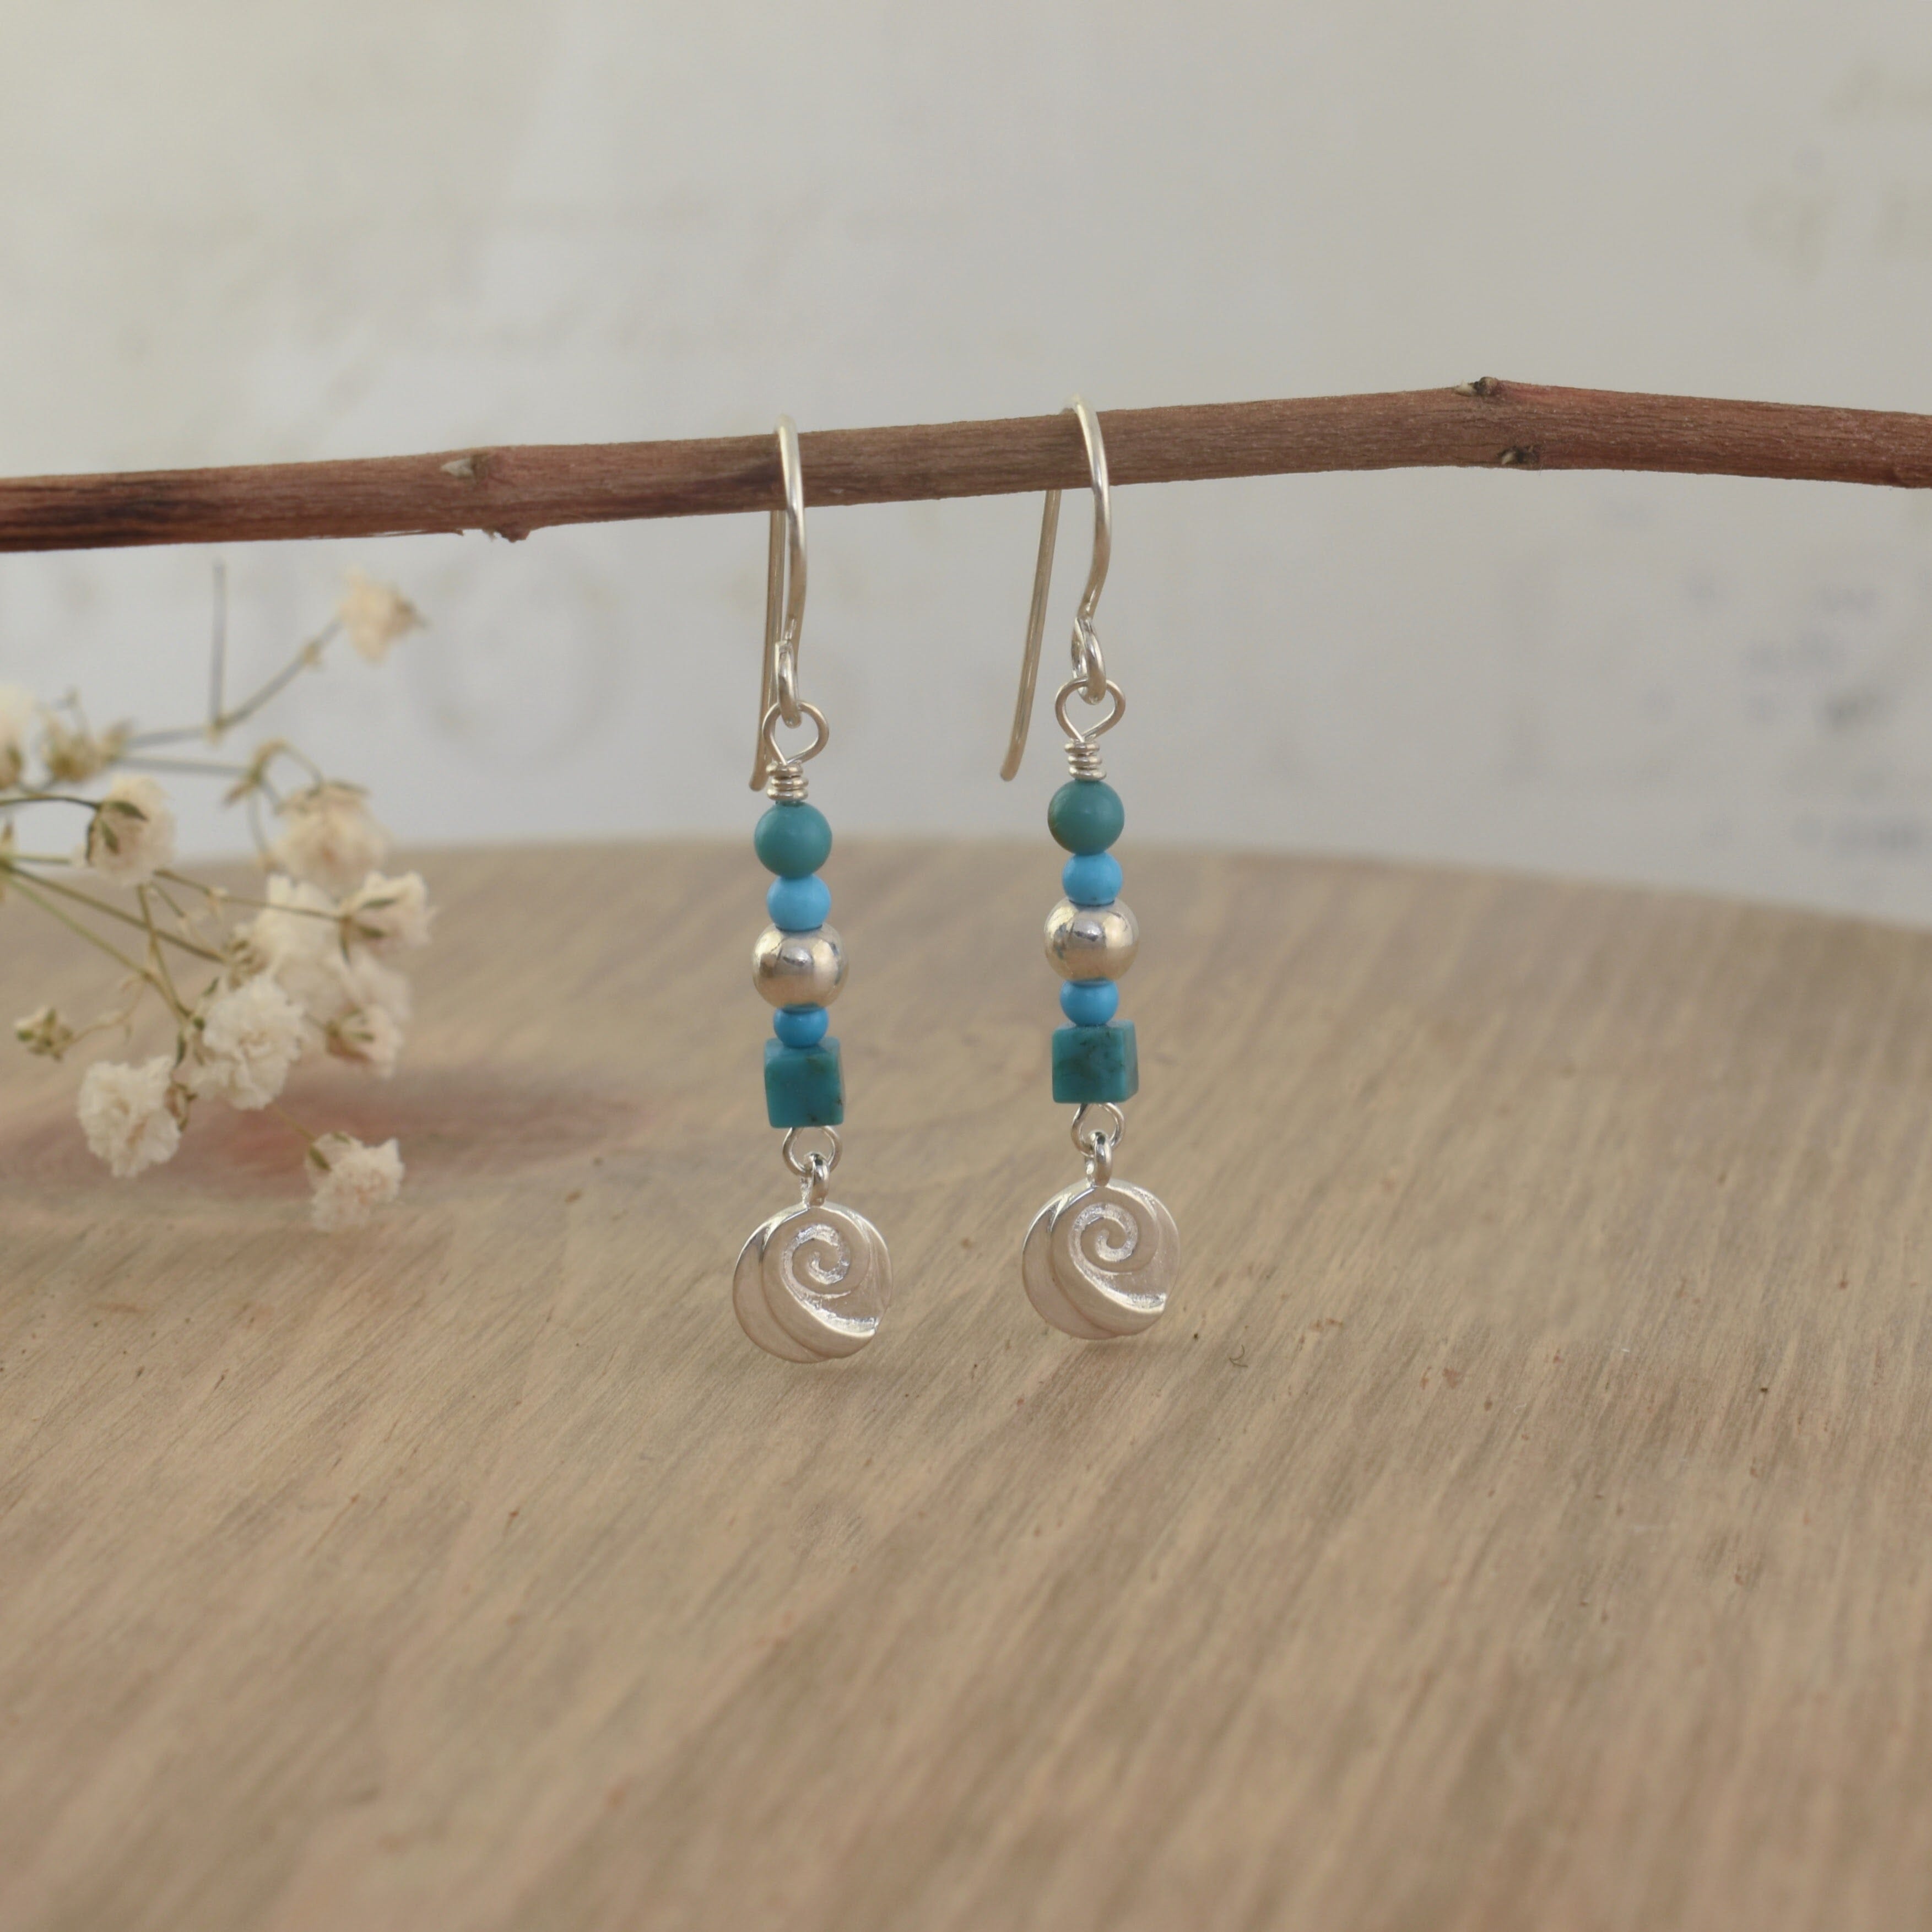 .925 sterling silver earrings with turquoise and howlite beads